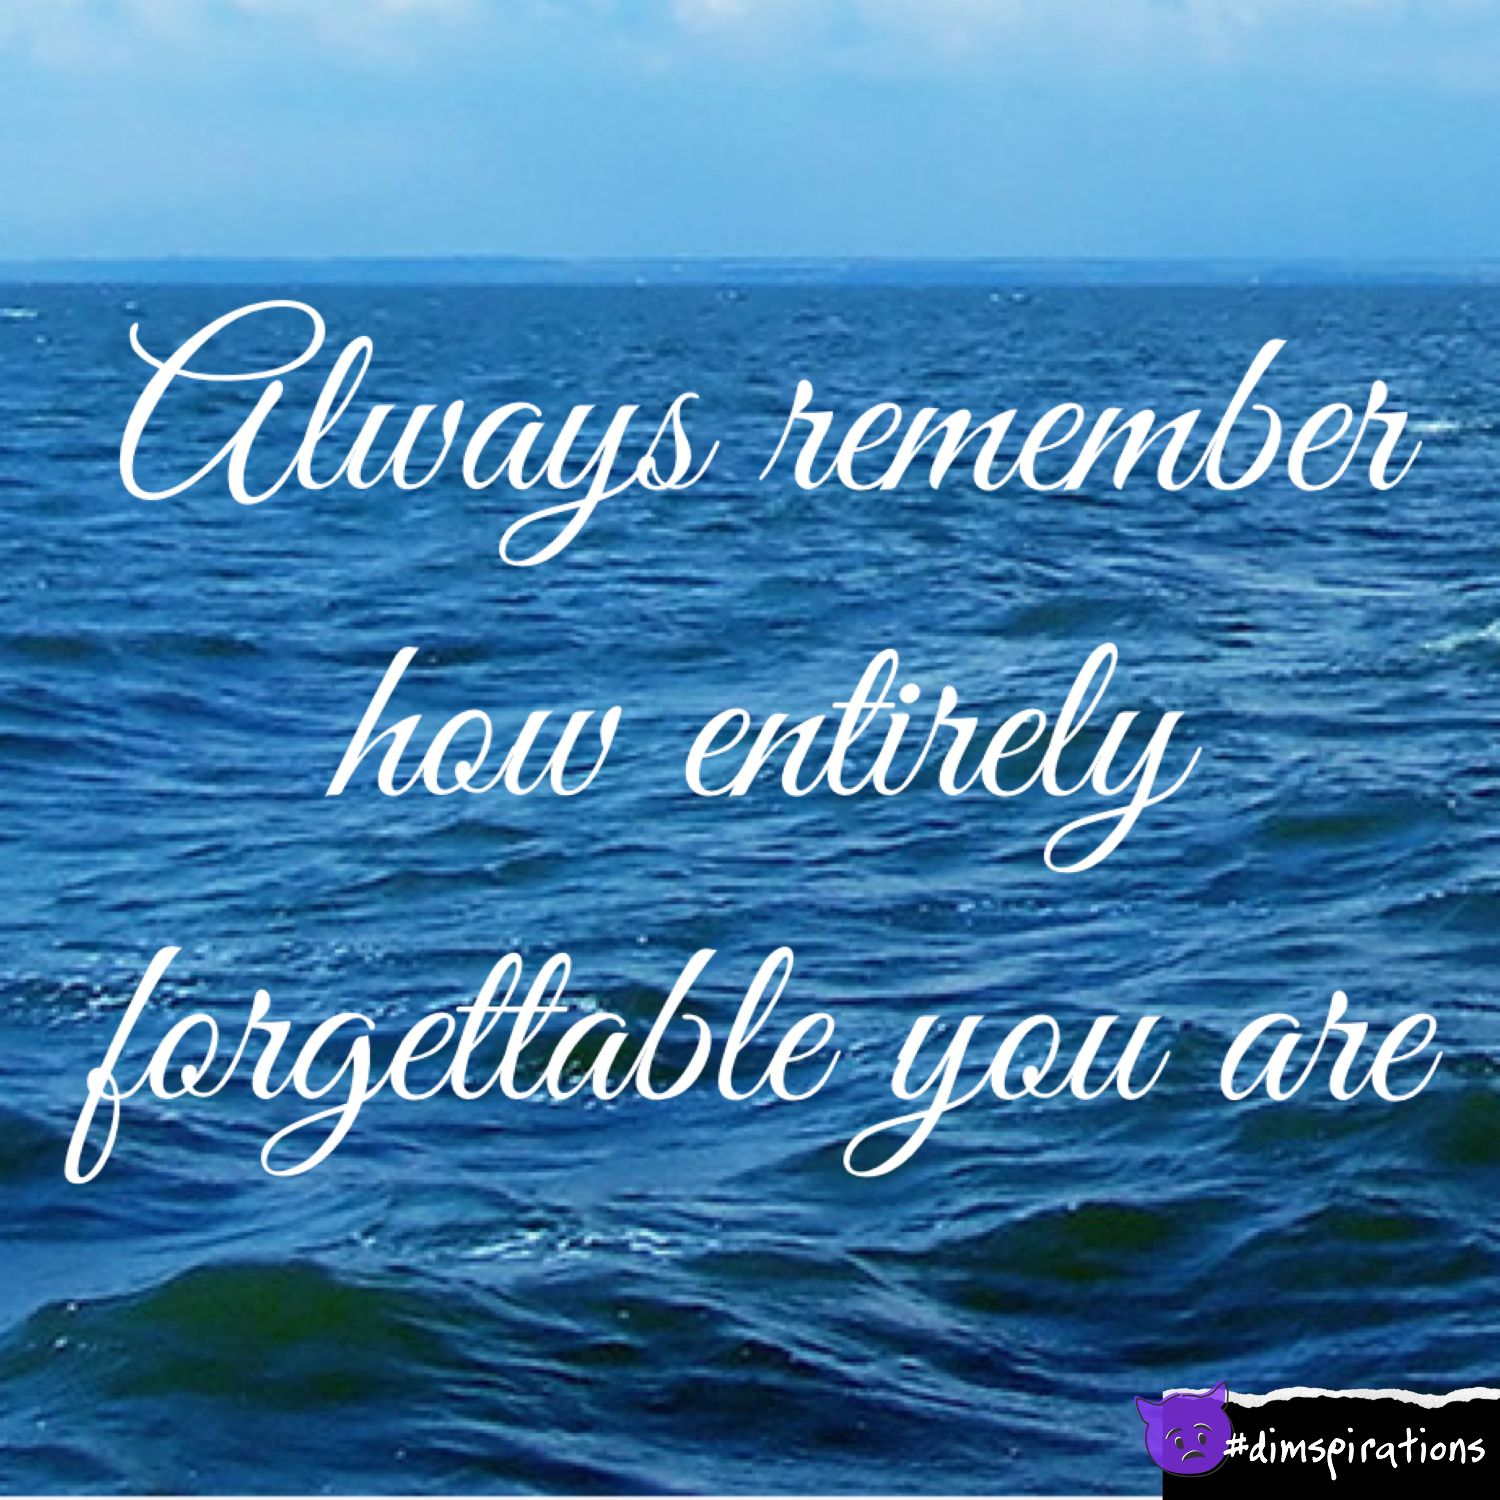 Always remember how entirely forgettable you are.